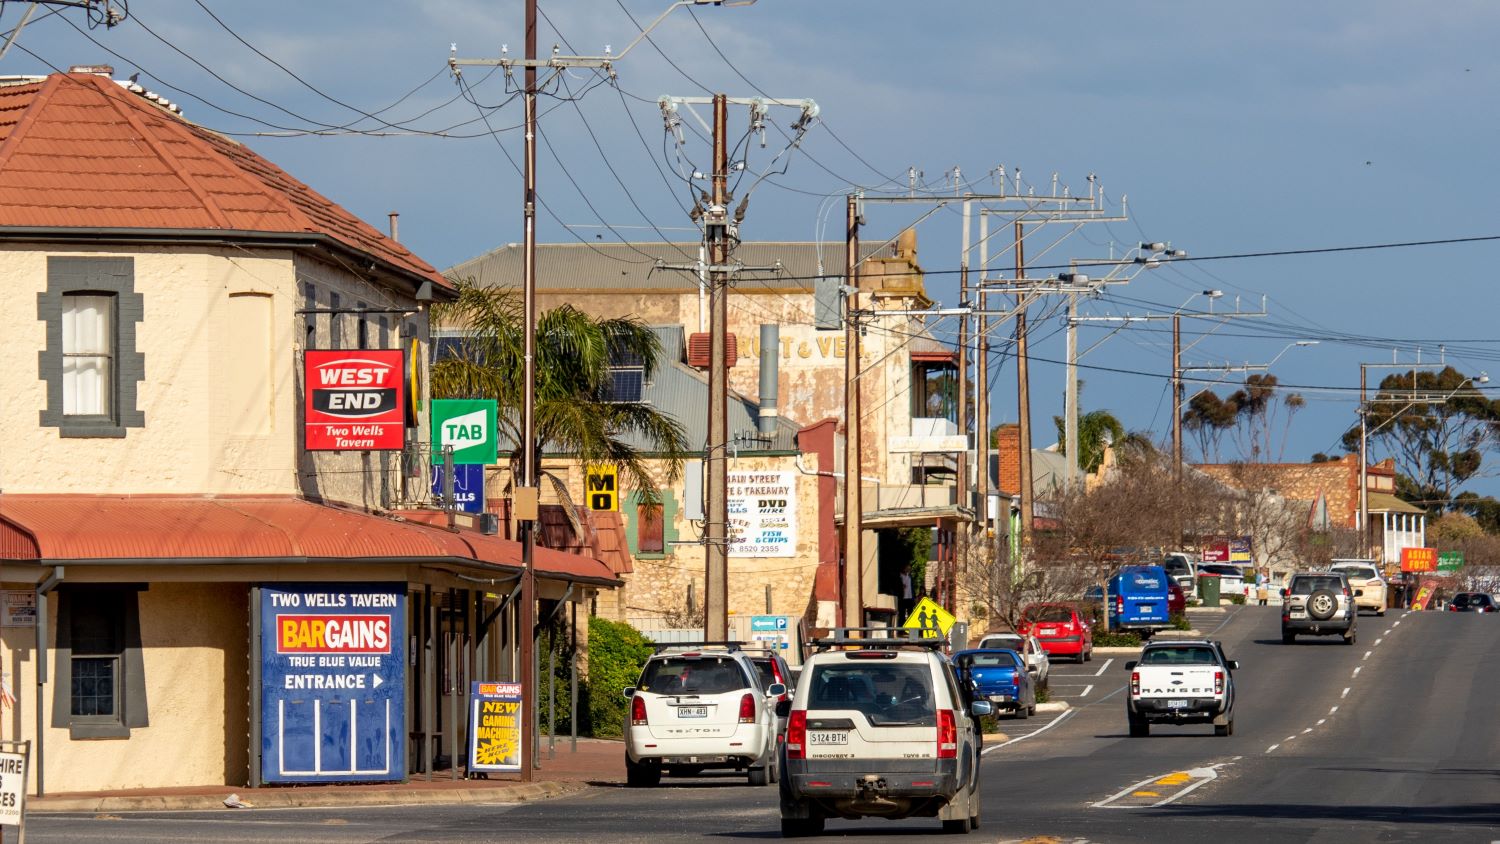 The Main Street of Two Wells stretching into the distance, with powerline cables filling the roadside.